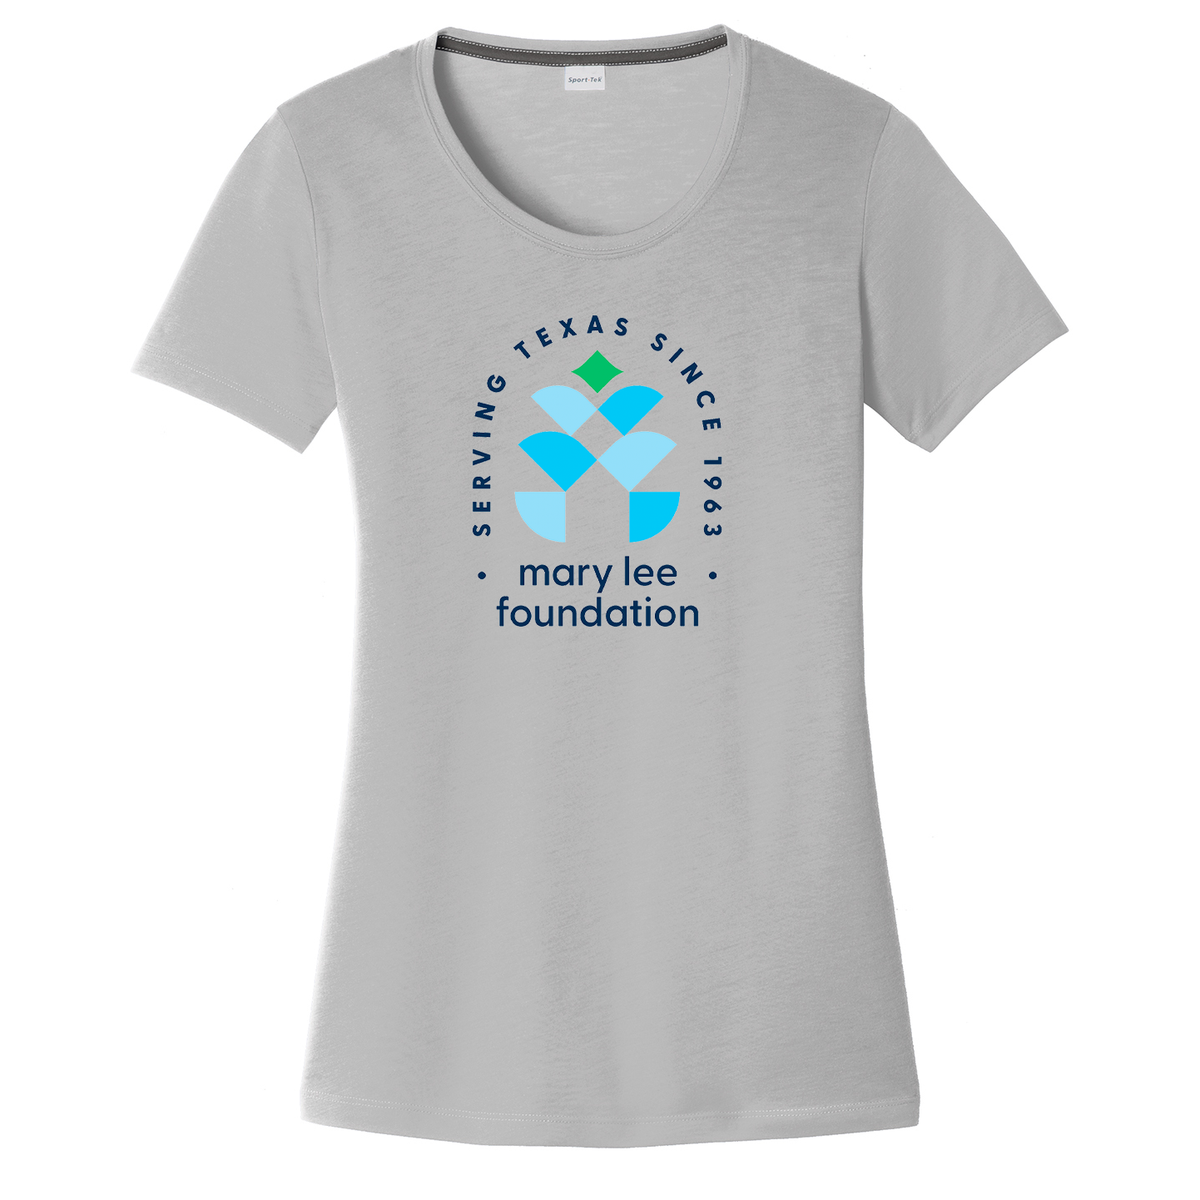 Mary Lee Foundation Women's CottonTouch Performance T-Shirt